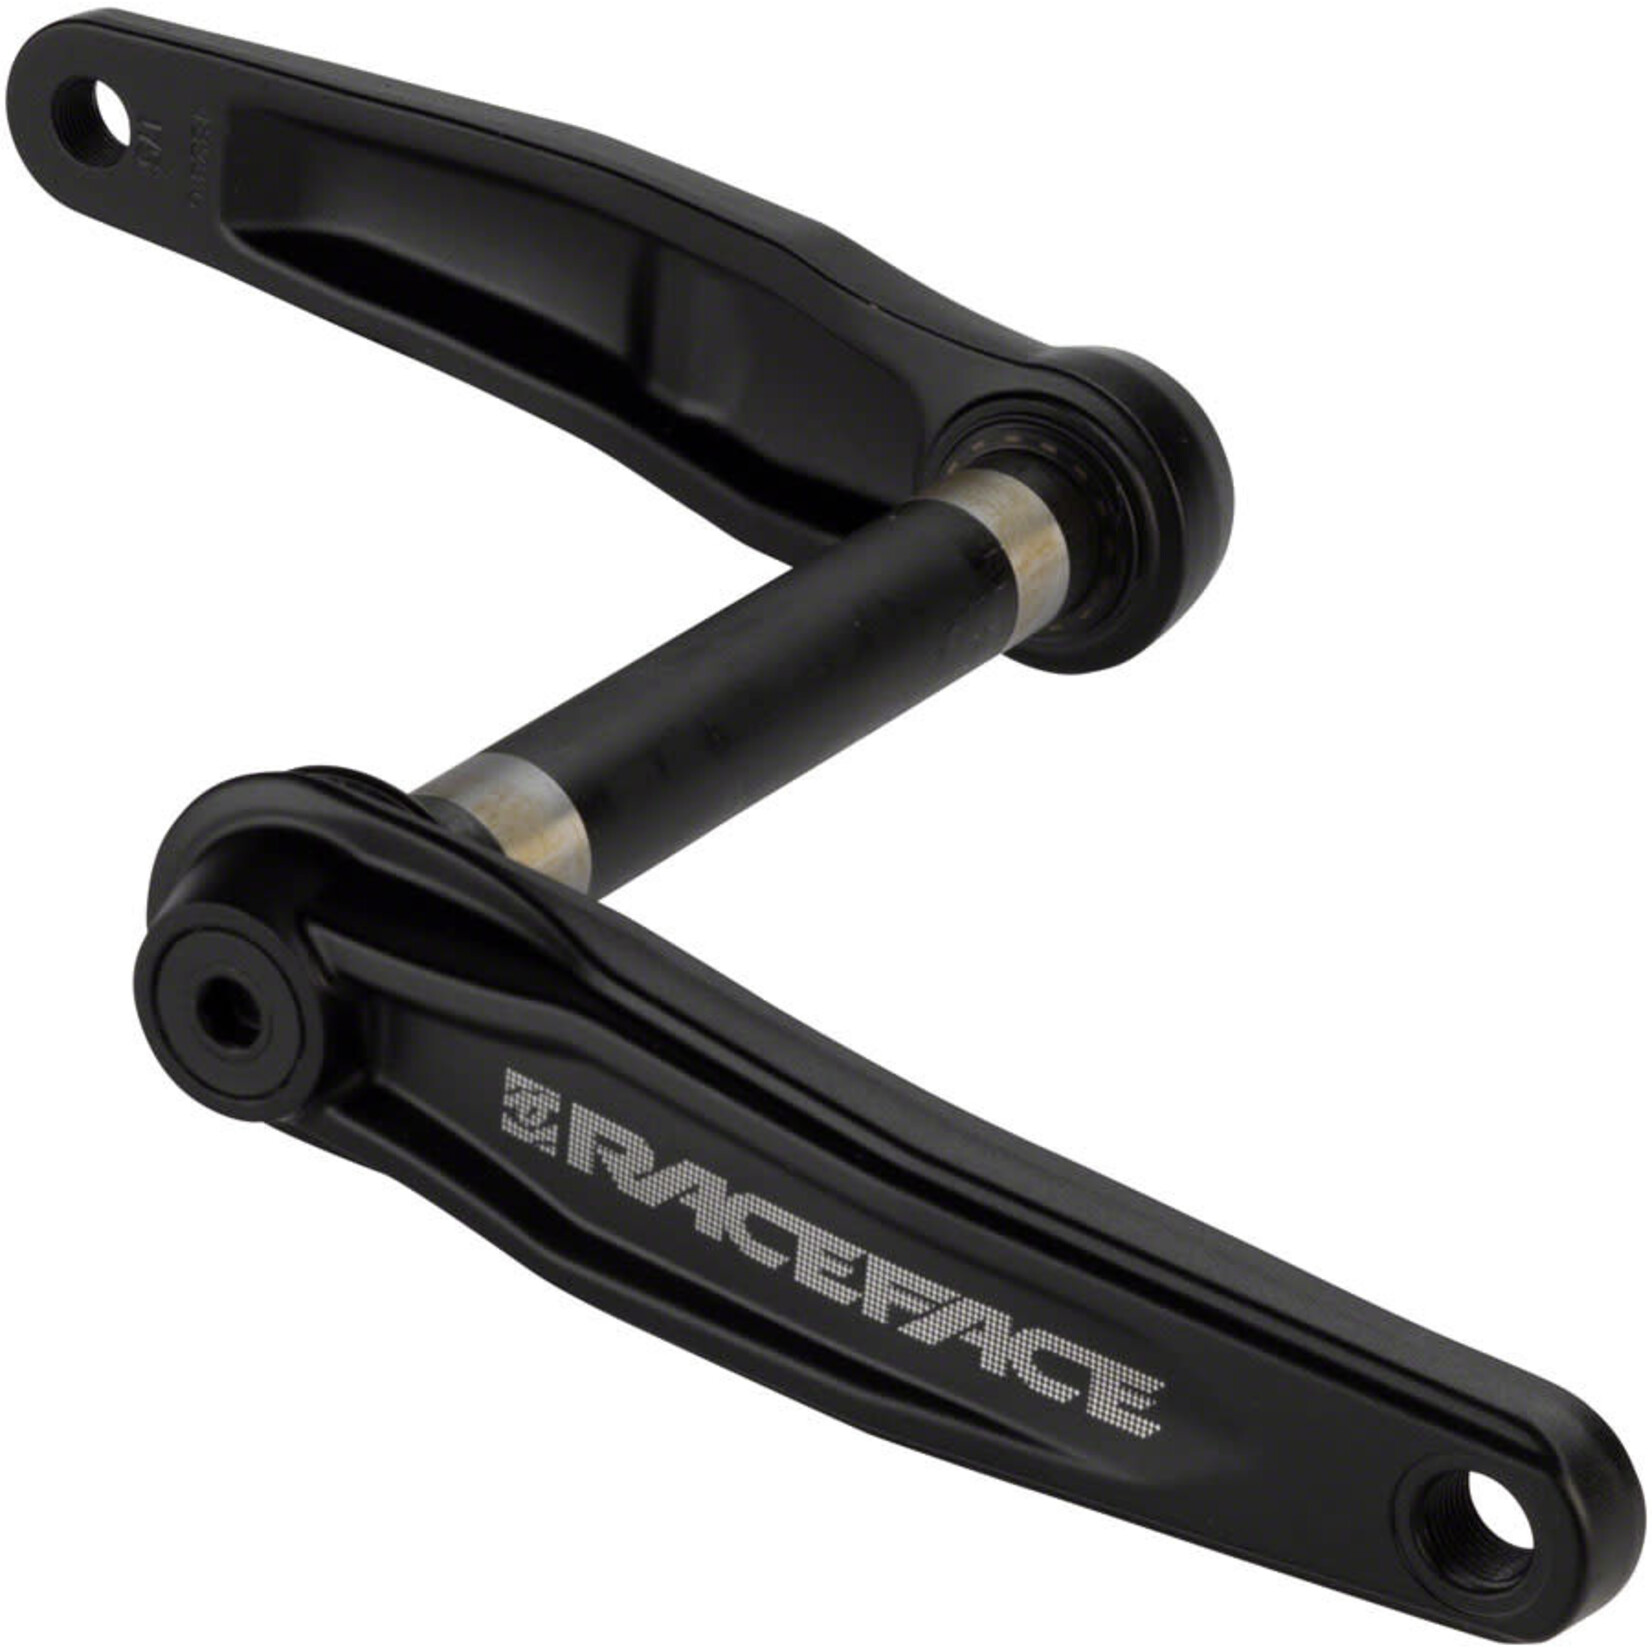 RaceFace RaceFace Ride Fat Bike Crankset - 175mm, Direct Mount, RaceFace EXISpindle Interface, For 190mm Rear Spacing, Black